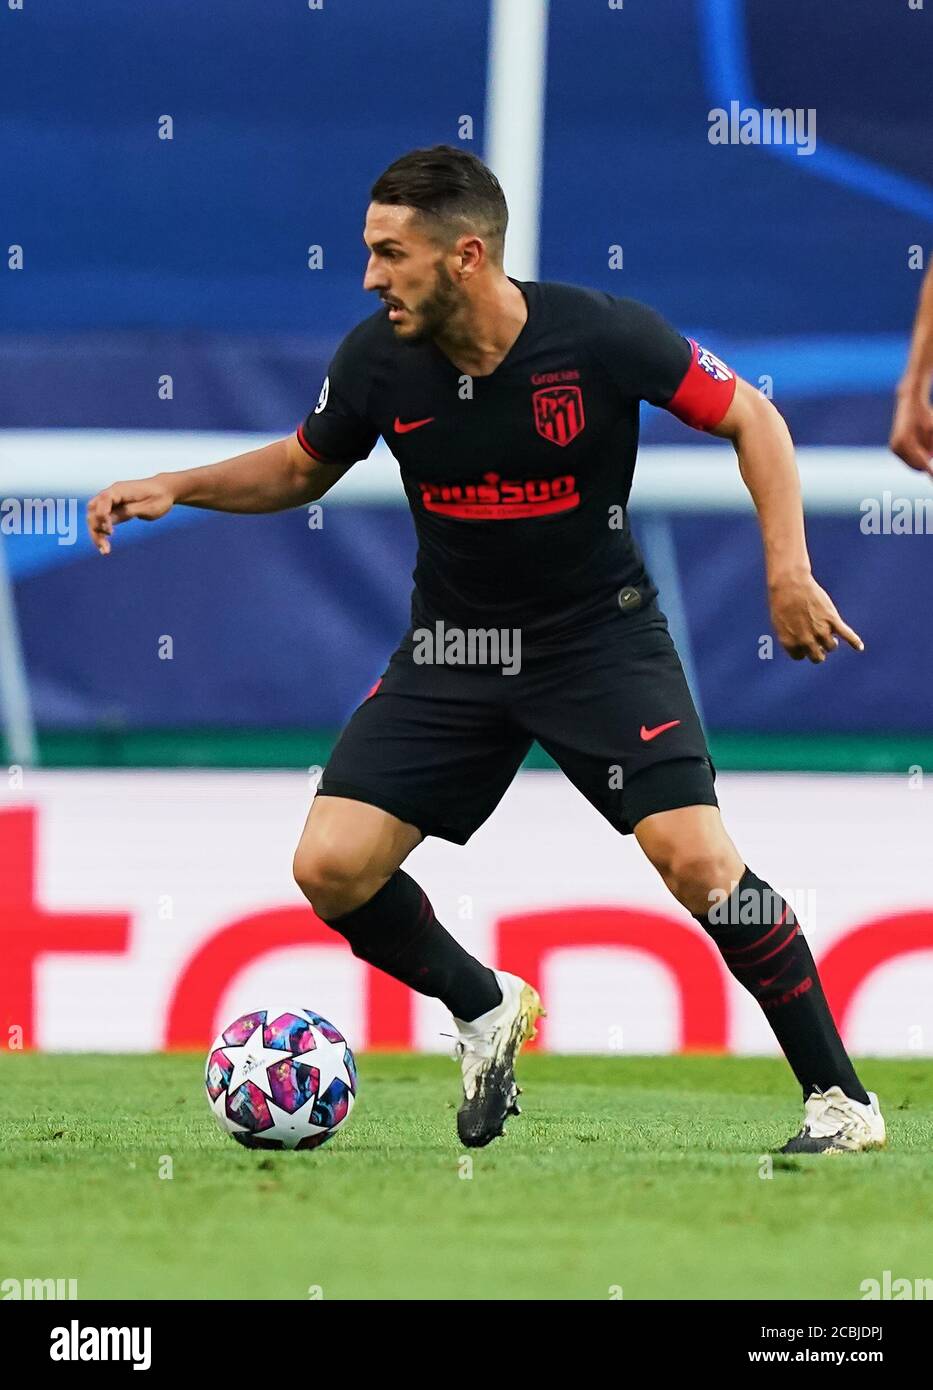 Lisbon, Lissabon, Portugal, 13th August 2020,  KOKE, Jorge Resurreccion Merodio, Atletico 6  in the quarterfinal UEFA Champions League match final tournament RB LEIPZIG - ATLETICO MADRID 2-1 in Season 2019/2020.  © Peter Schatz / Alamy Live News / Pool    - UEFA REGULATIONS PROHIBIT ANY USE OF PHOTOGRAPHS as IMAGE SEQUENCES and/or QUASI-VIDEO -  National and international News-Agencies OUT Editorial Use ONLY Stock Photo